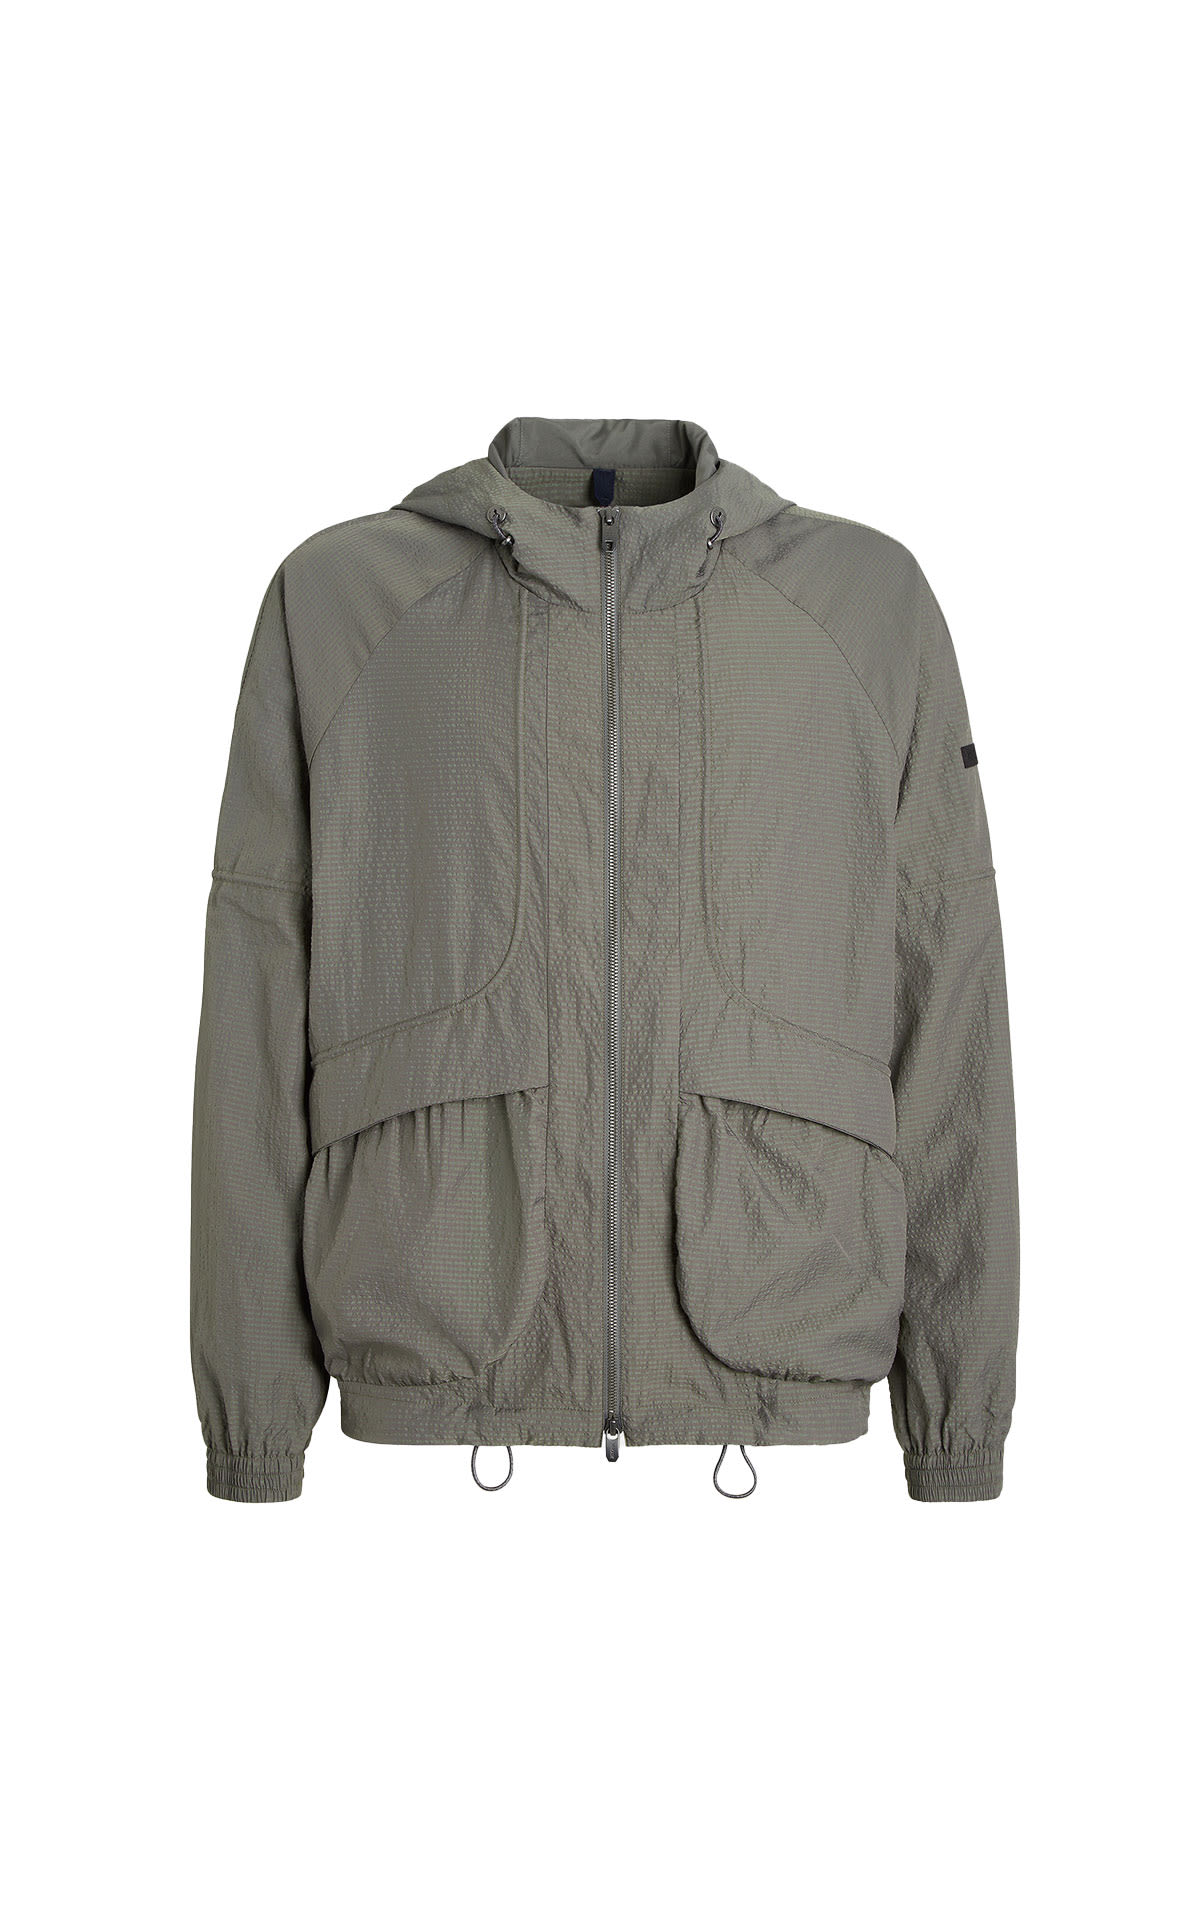 Zegna Outerwear reversible from Bicester Village